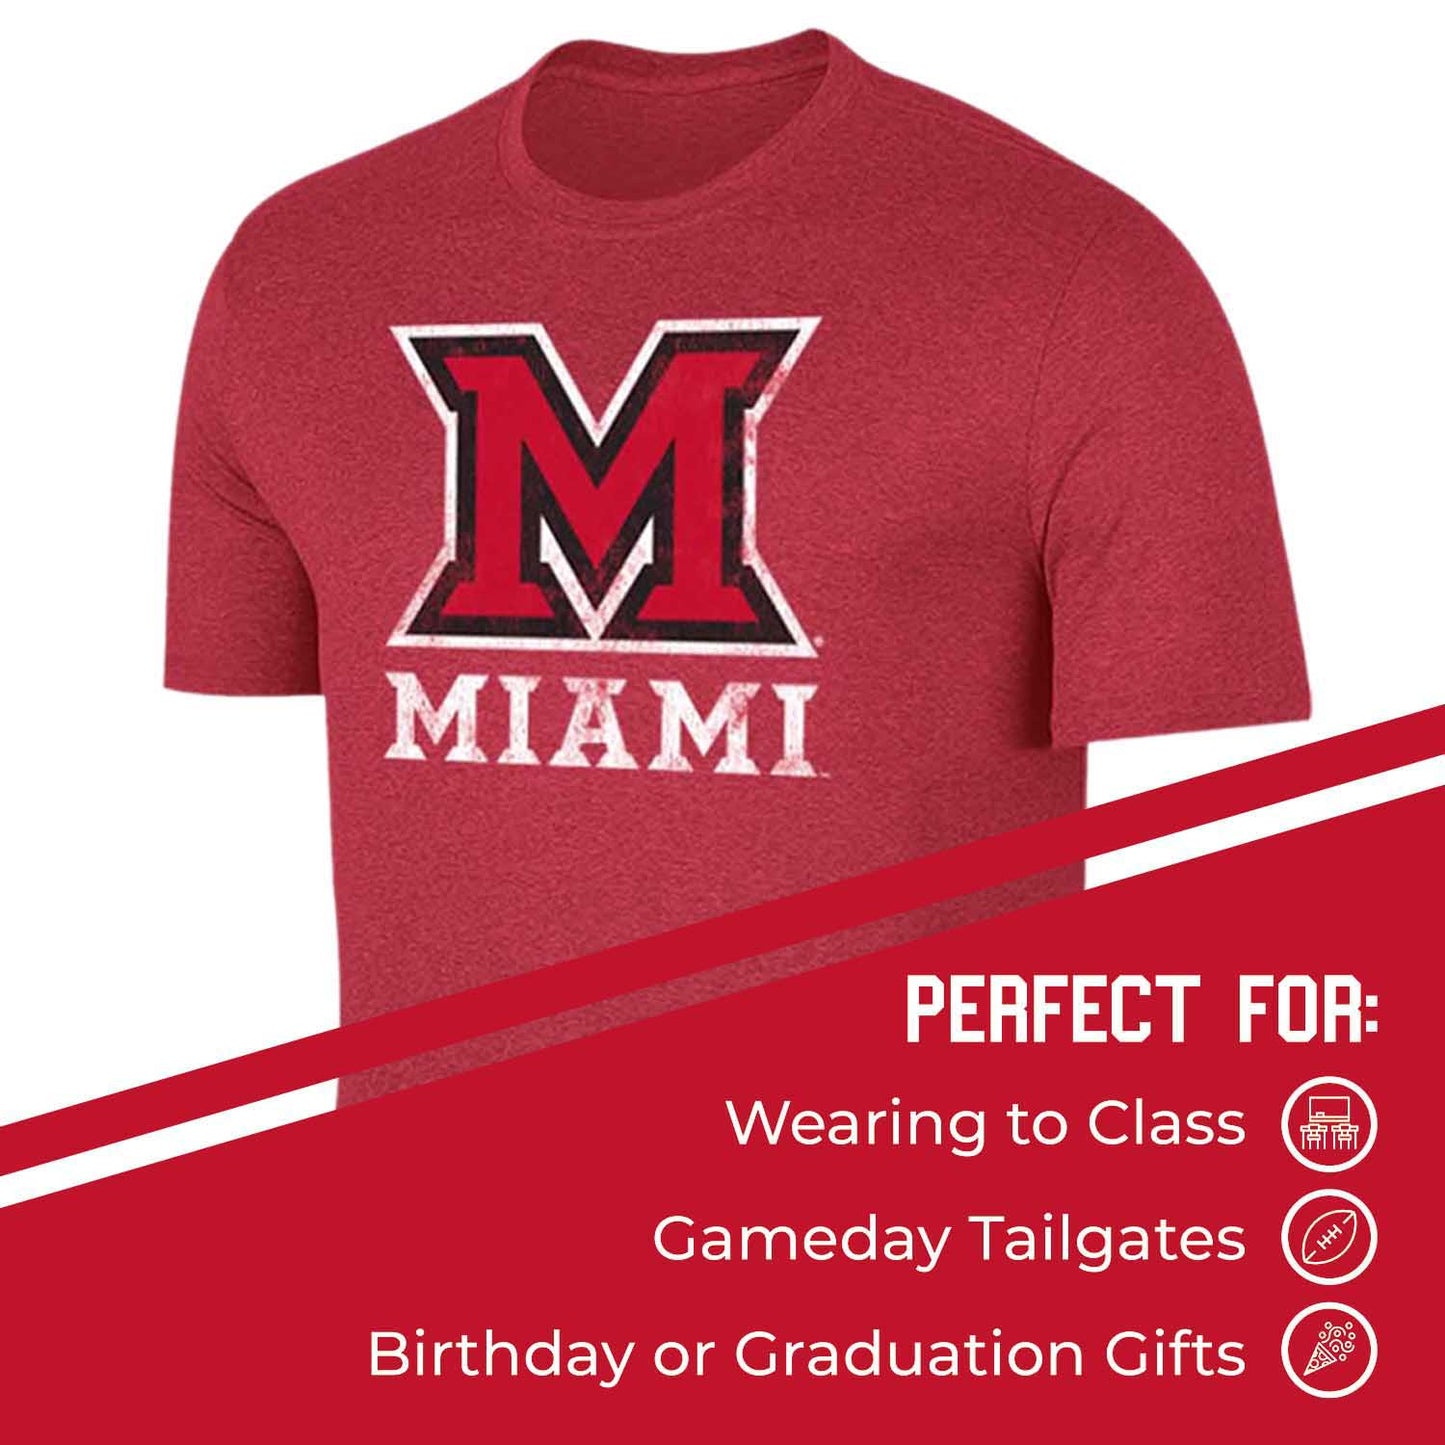 Miami Redhawks Adult MVP Heathered Cotton Blend T-Shirt - Red